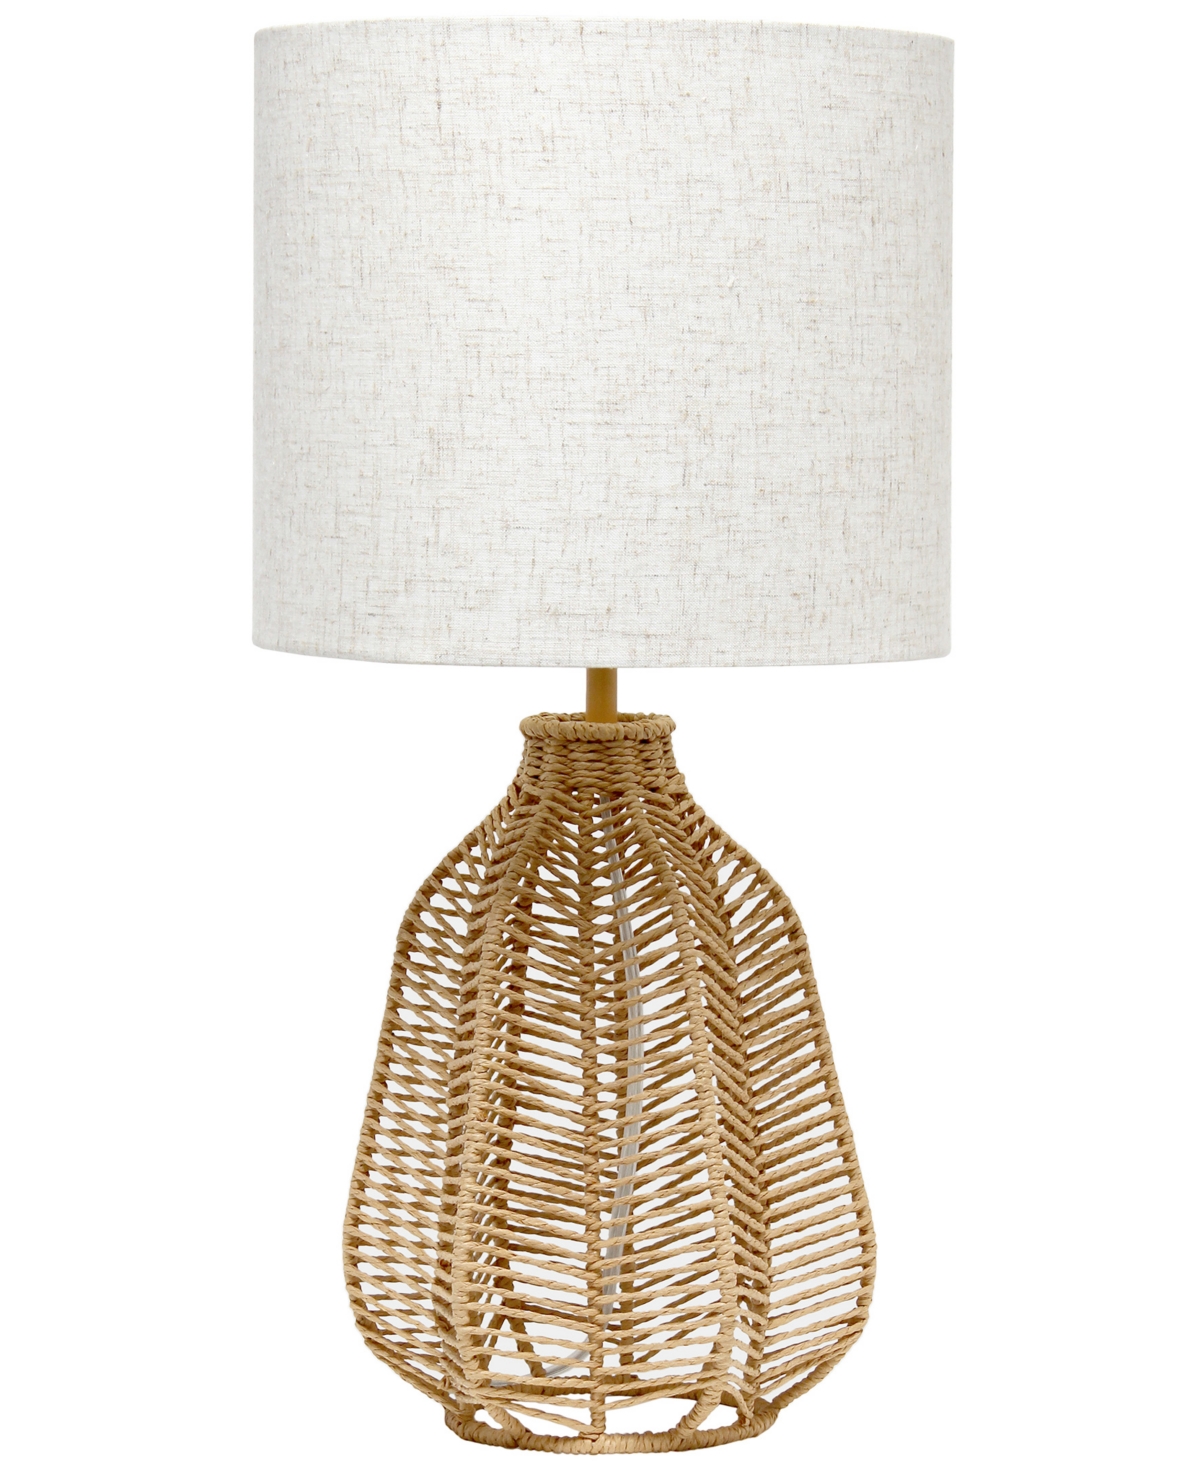 All The Rages 21" Vintage-like Rattan Wicker Style Paper Rope Bedside Table Lamp With Light Beige Fabric Shade In Natural